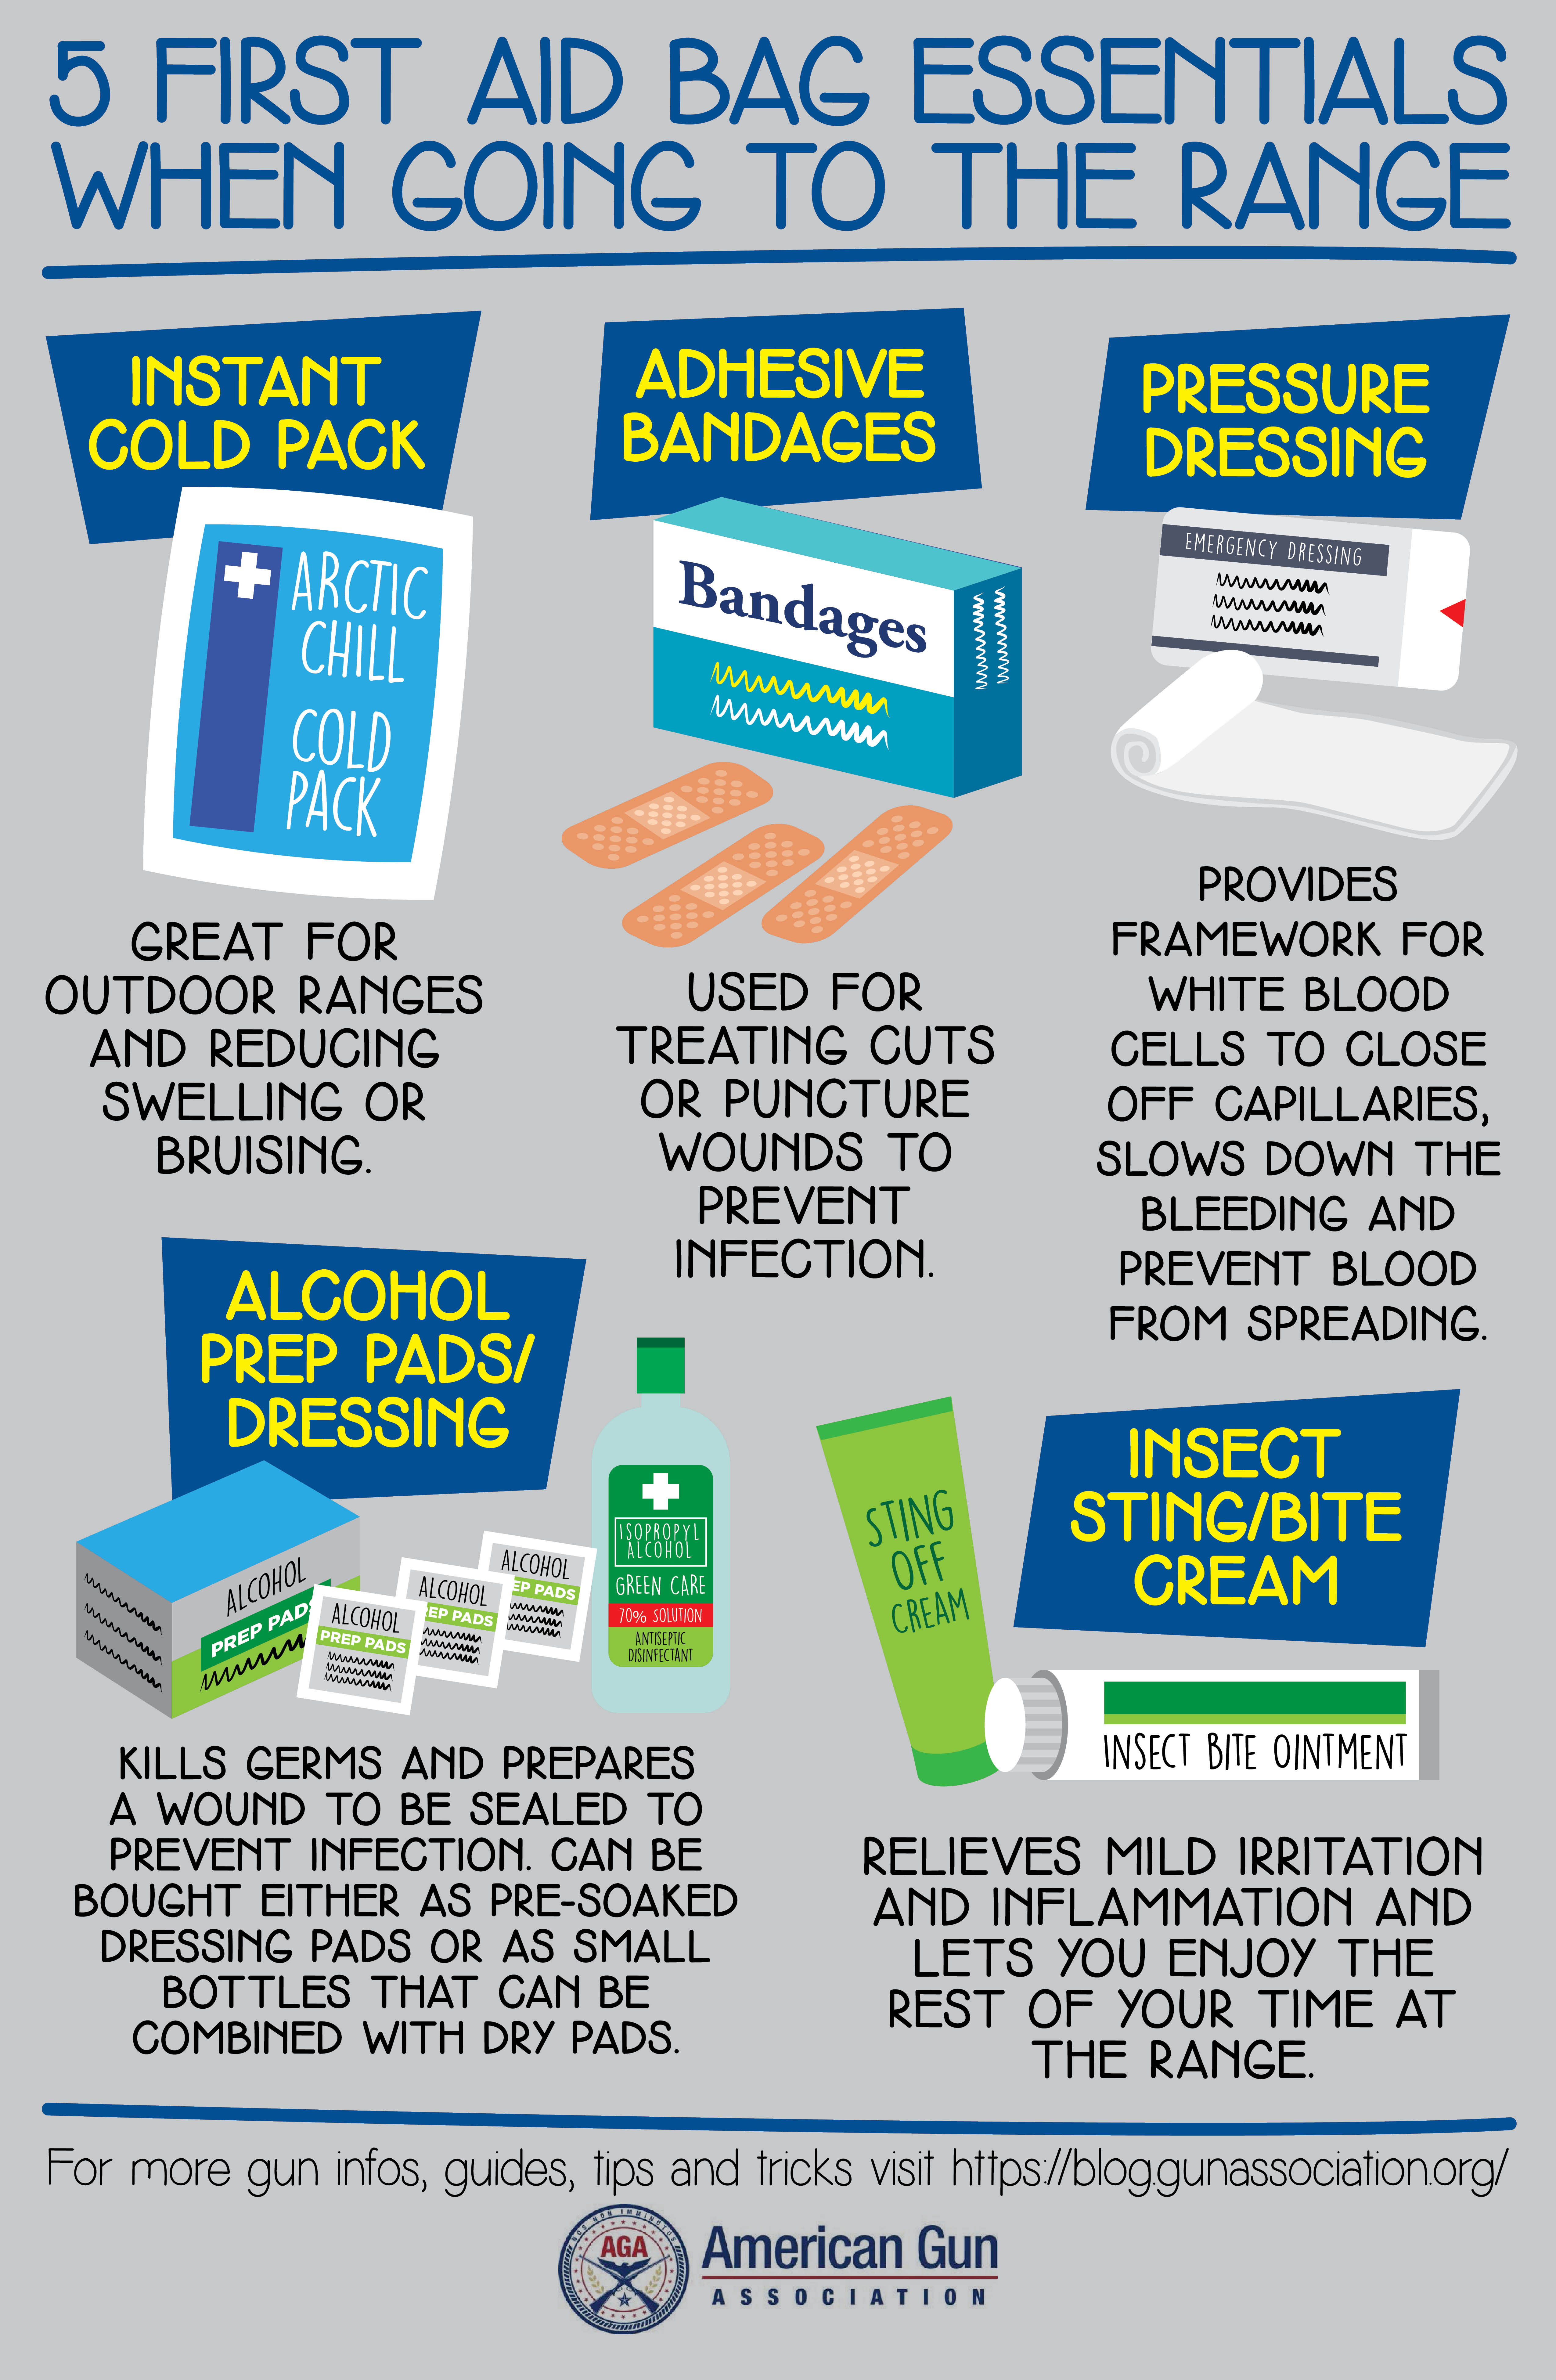 5 First Aid Bag Essentials When Going to the Range | infographics